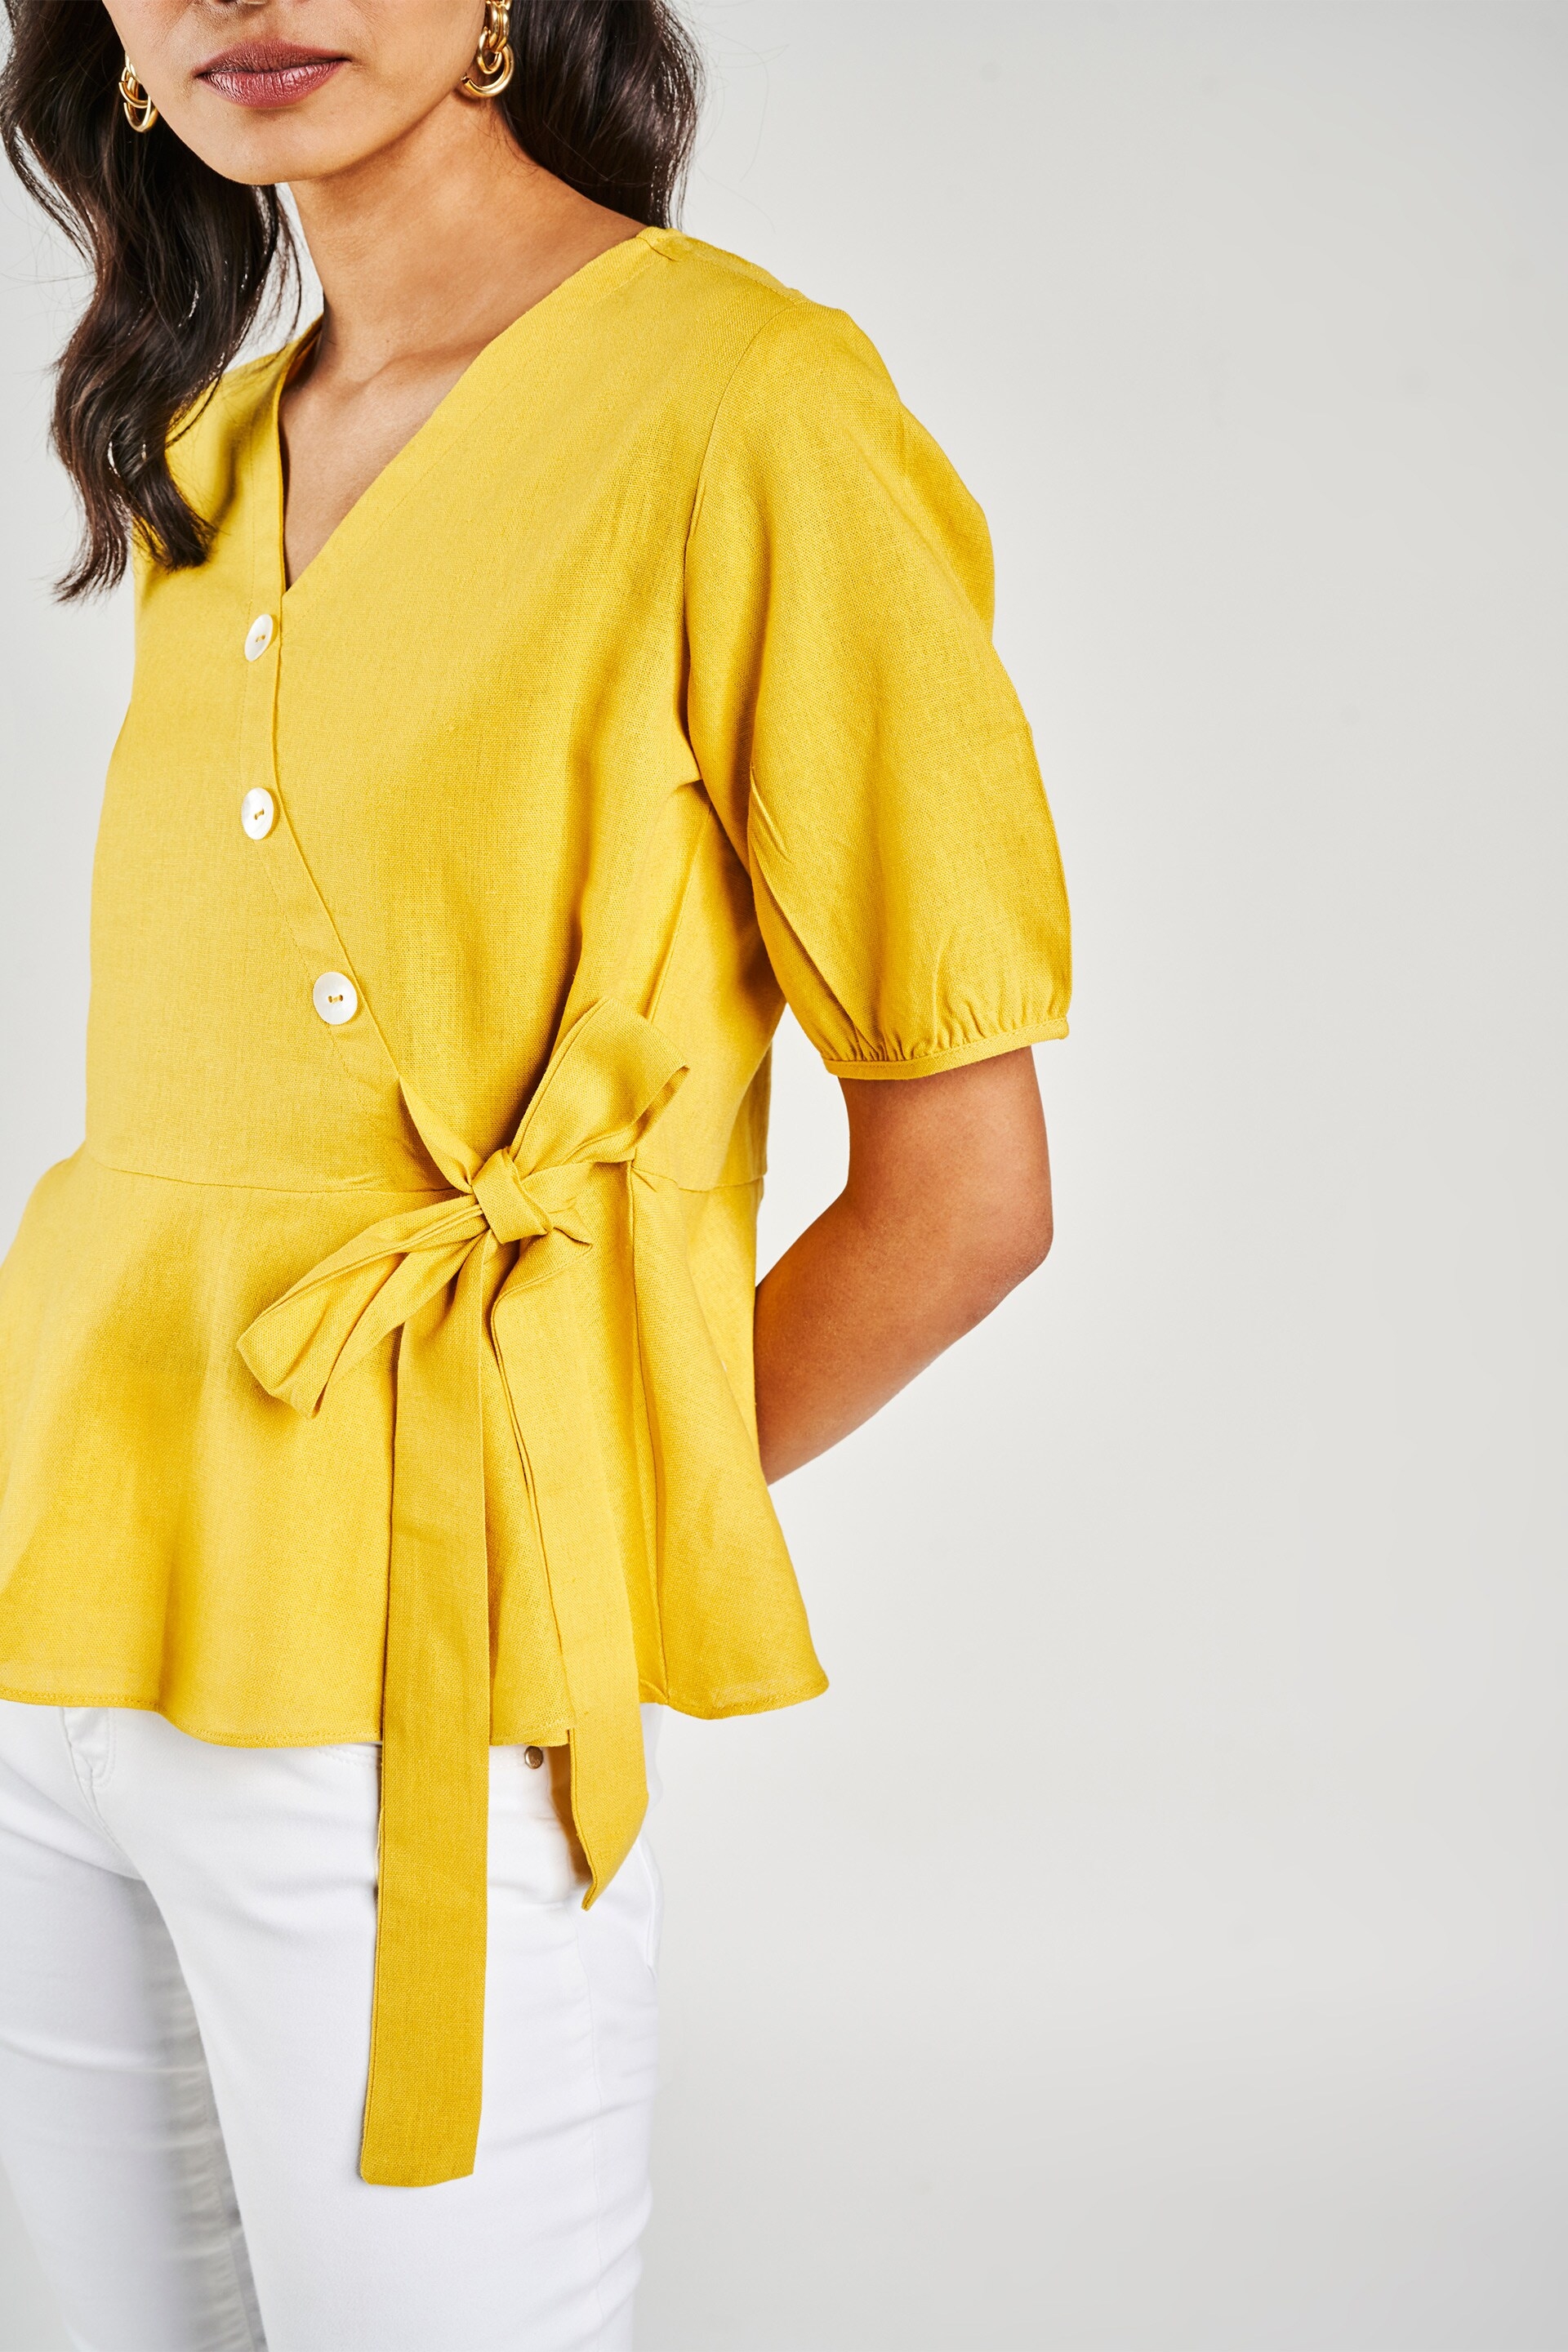 AND | AND YELLOW TOP 0